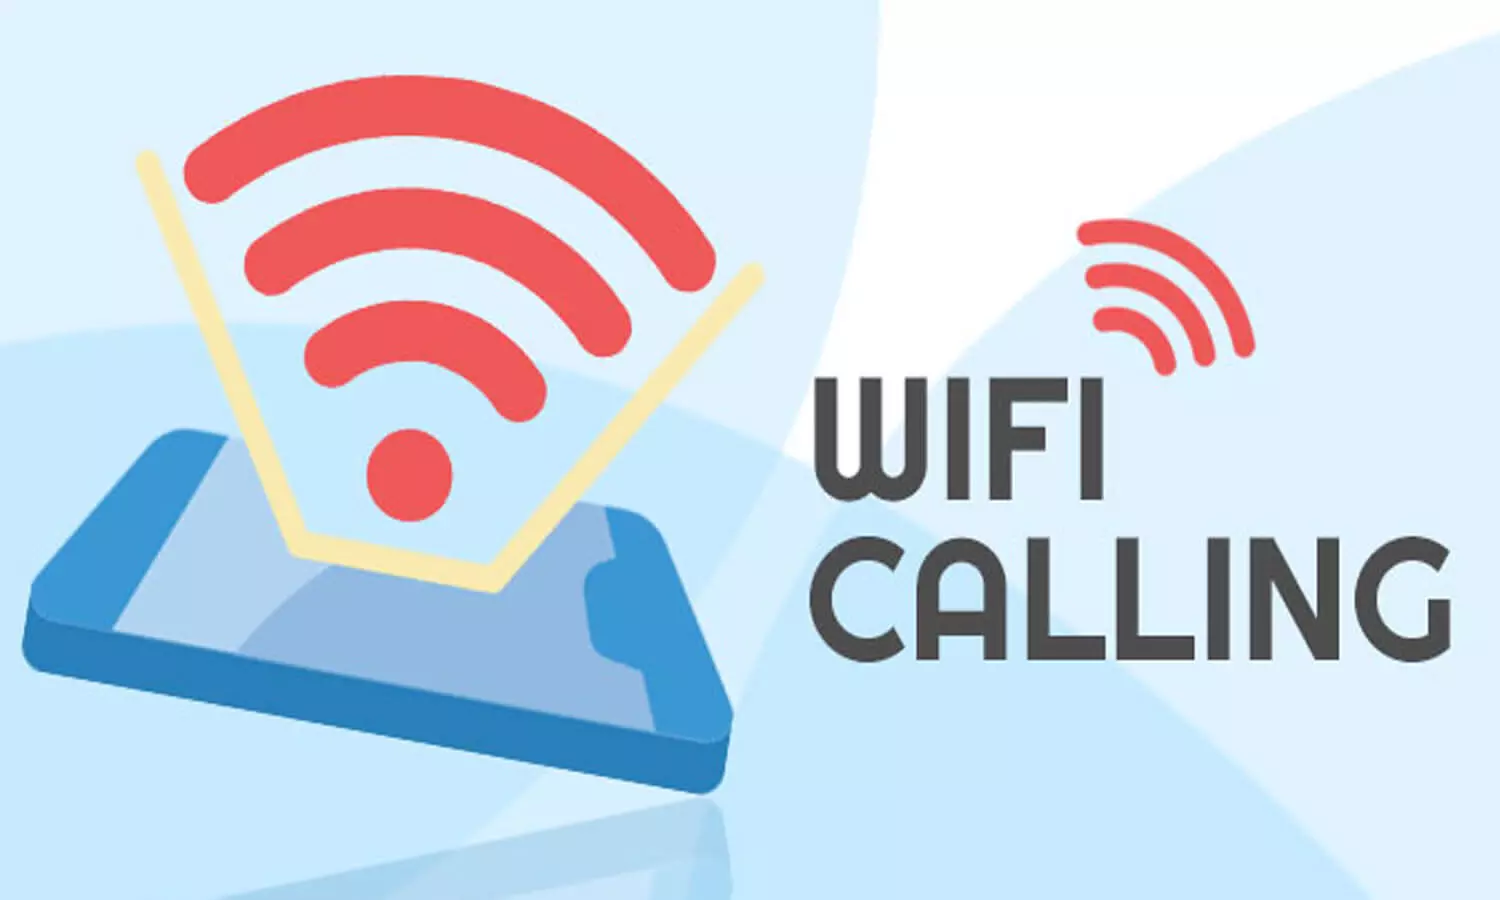 Poor network! Try Wi-Fi calling on your Android and Apple device